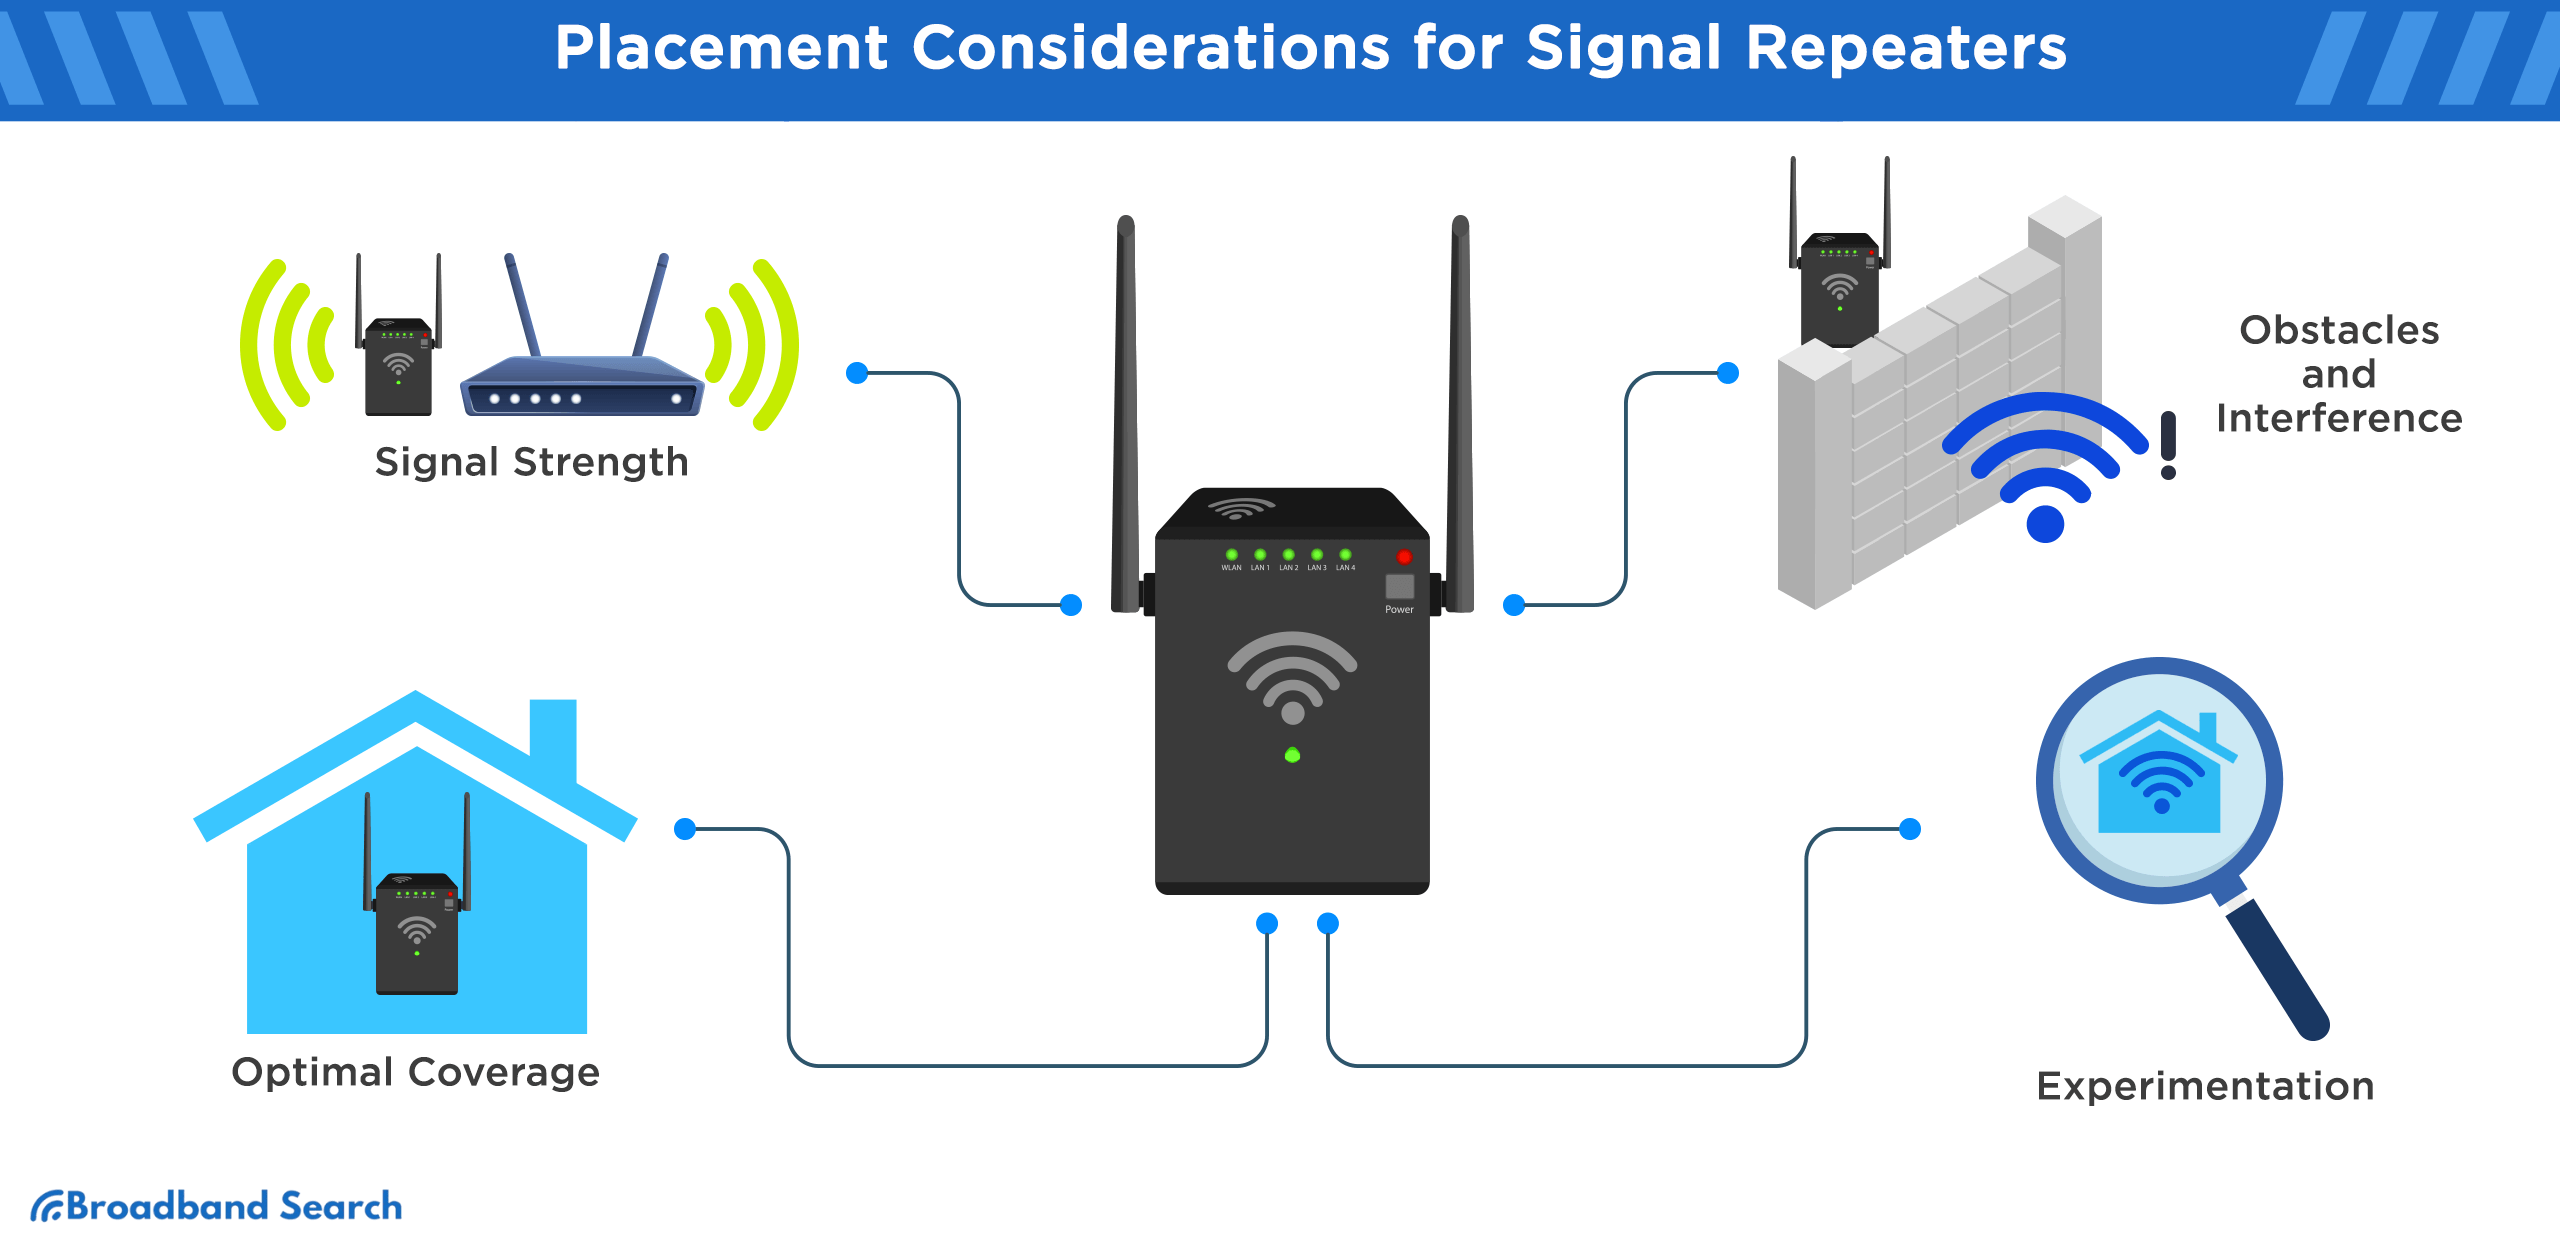 Placement considerations for signal repeaters